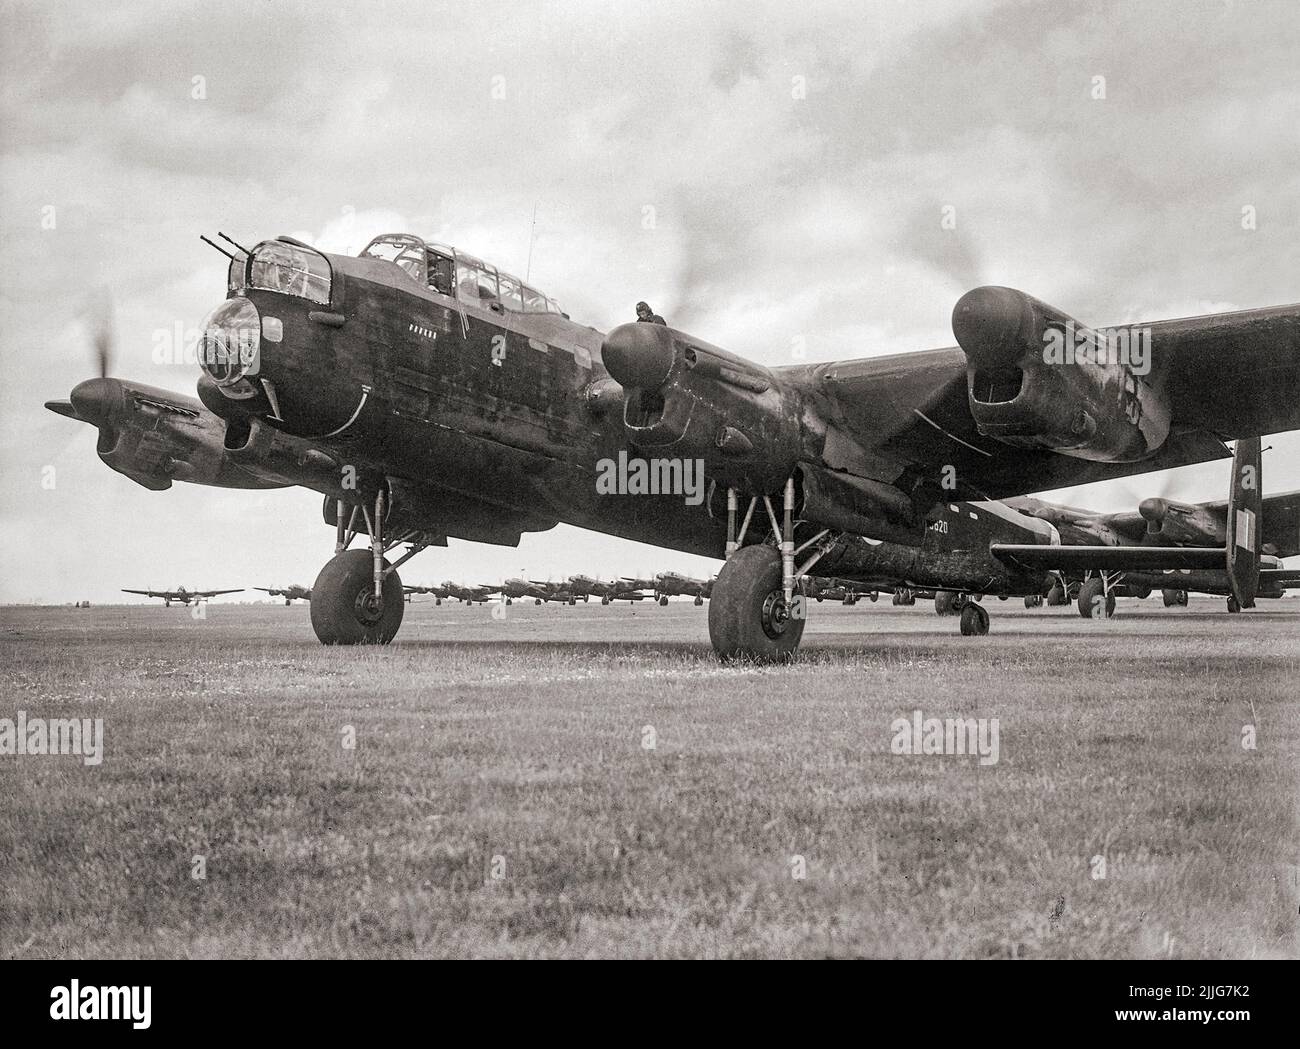 Avro Lancaster B Mark I, R5620 of No. 83 Squadron RAF, leads the queue of aircraft waiting to take off from Scampton, Lincolnshire, on the 'Thousand-Bomber' raid to Bremen, Germany. This British four-engined heavy bomber was the only aircraft to be lost by the Squadron that night. Stock Photo